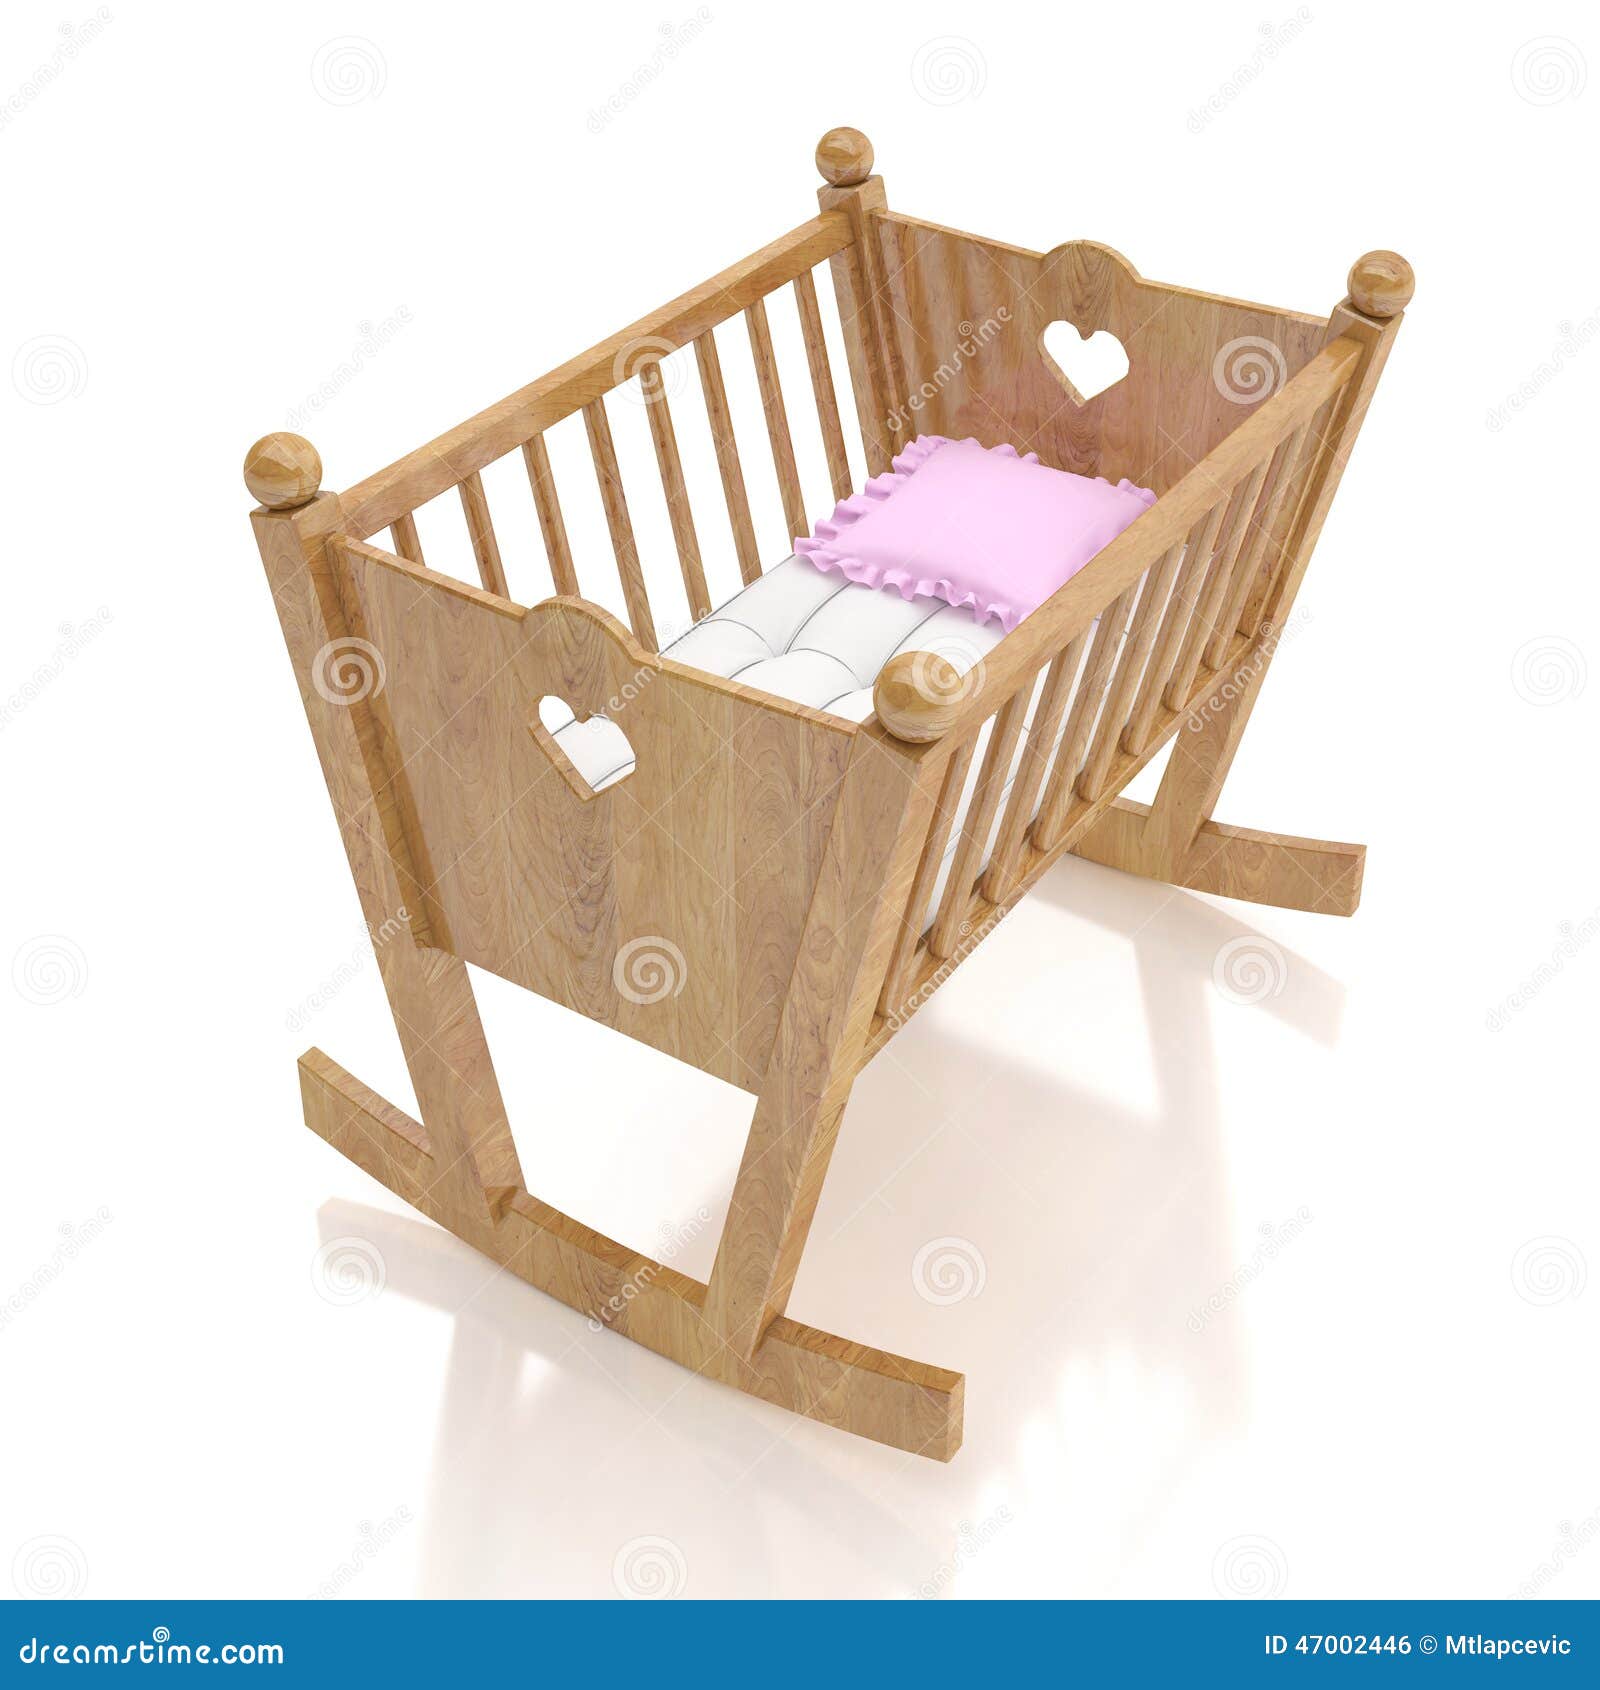 Wooden Baby Cradle With Rose Pillow Isolated On White 